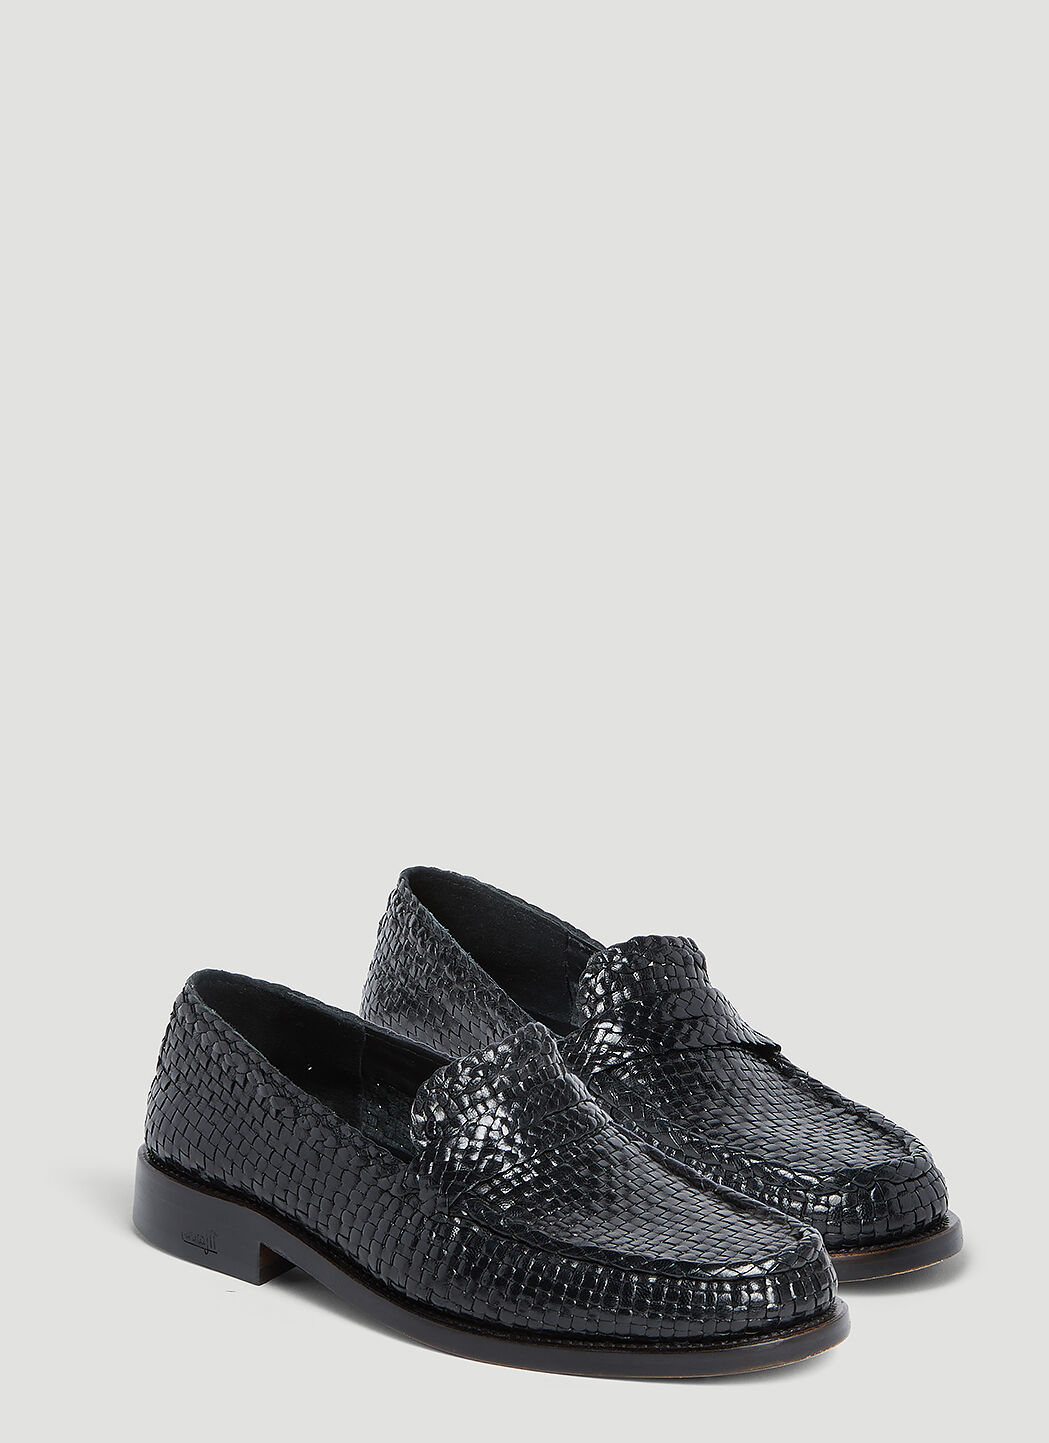 Woven Leather Bambi Loafers